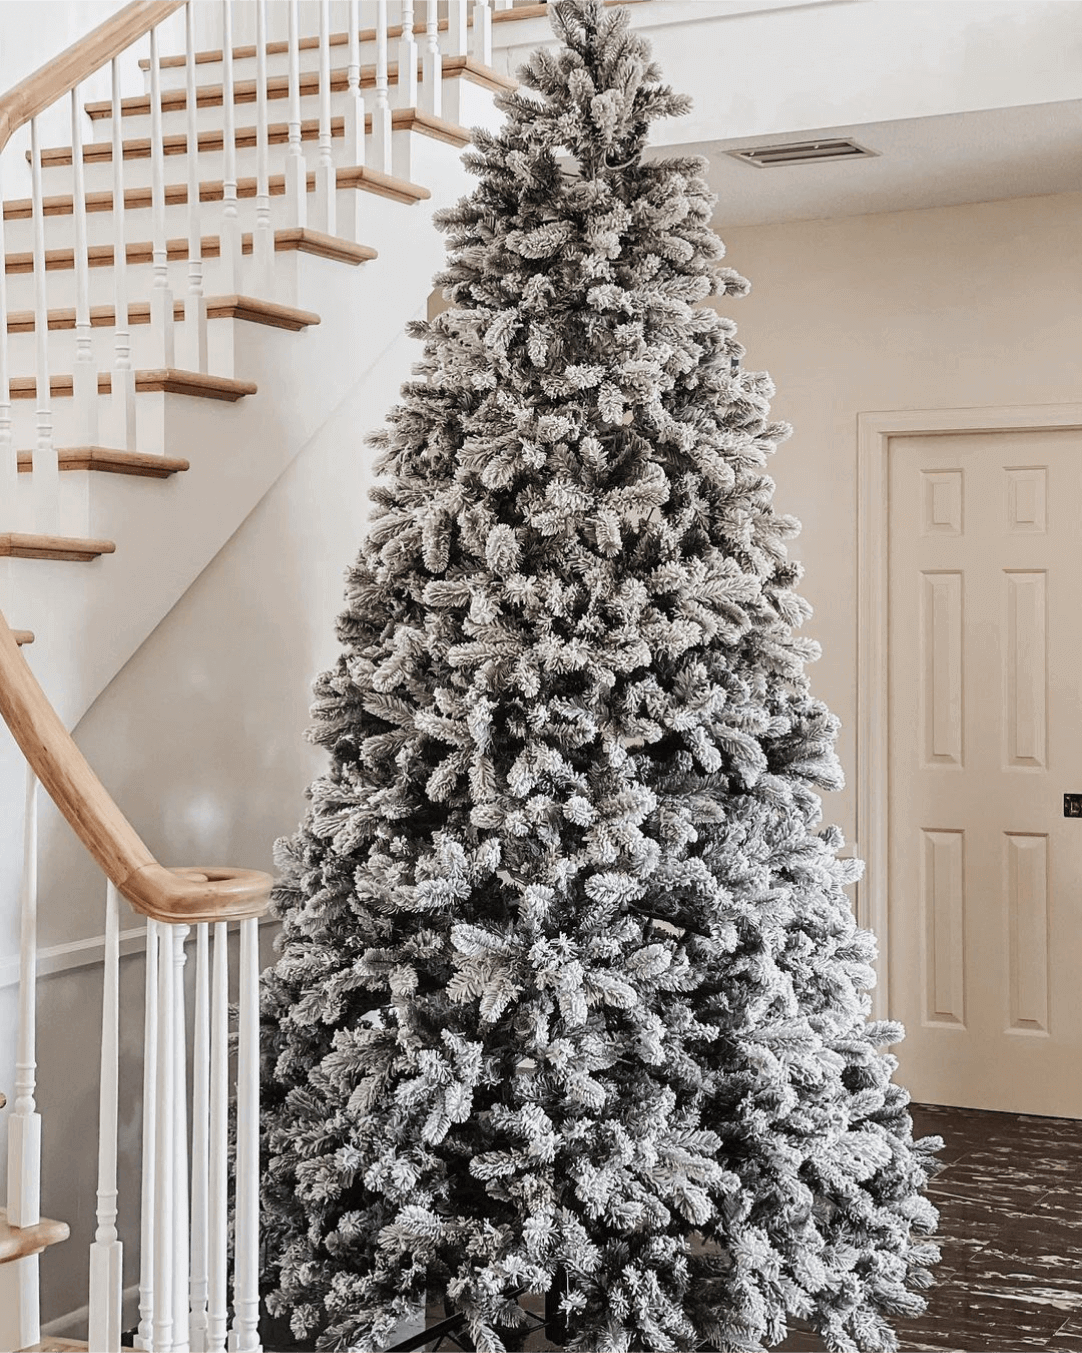 King of Christmas 12' King Flock® Quick-Shape Artificial Christmas Tree Unlit